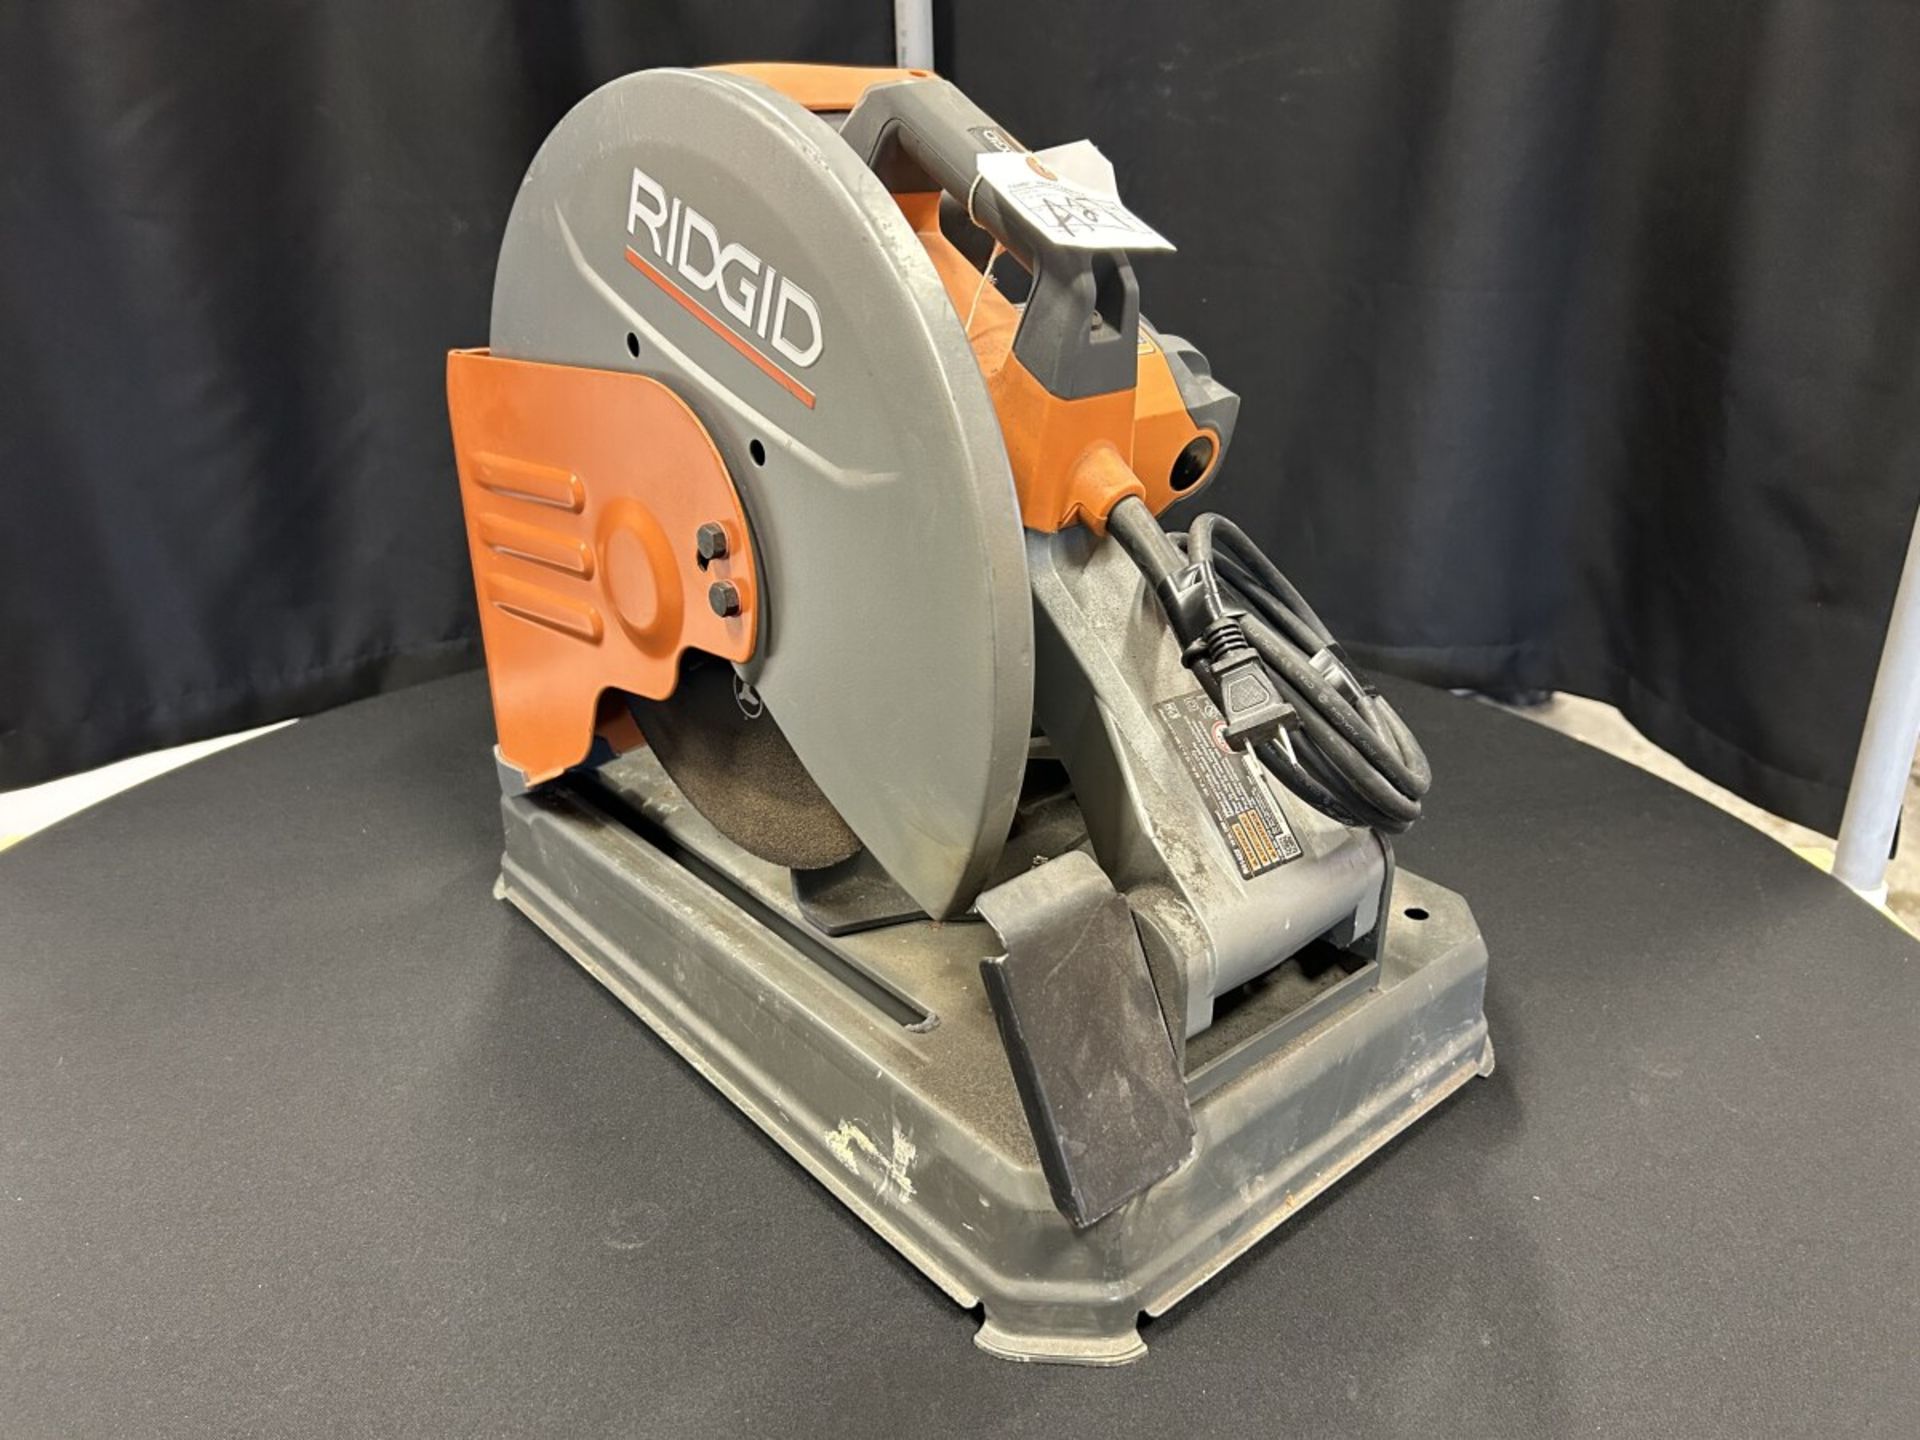 RIDGID 14IN CHOP SAW MODELR41422 - A27 - Image 4 of 4